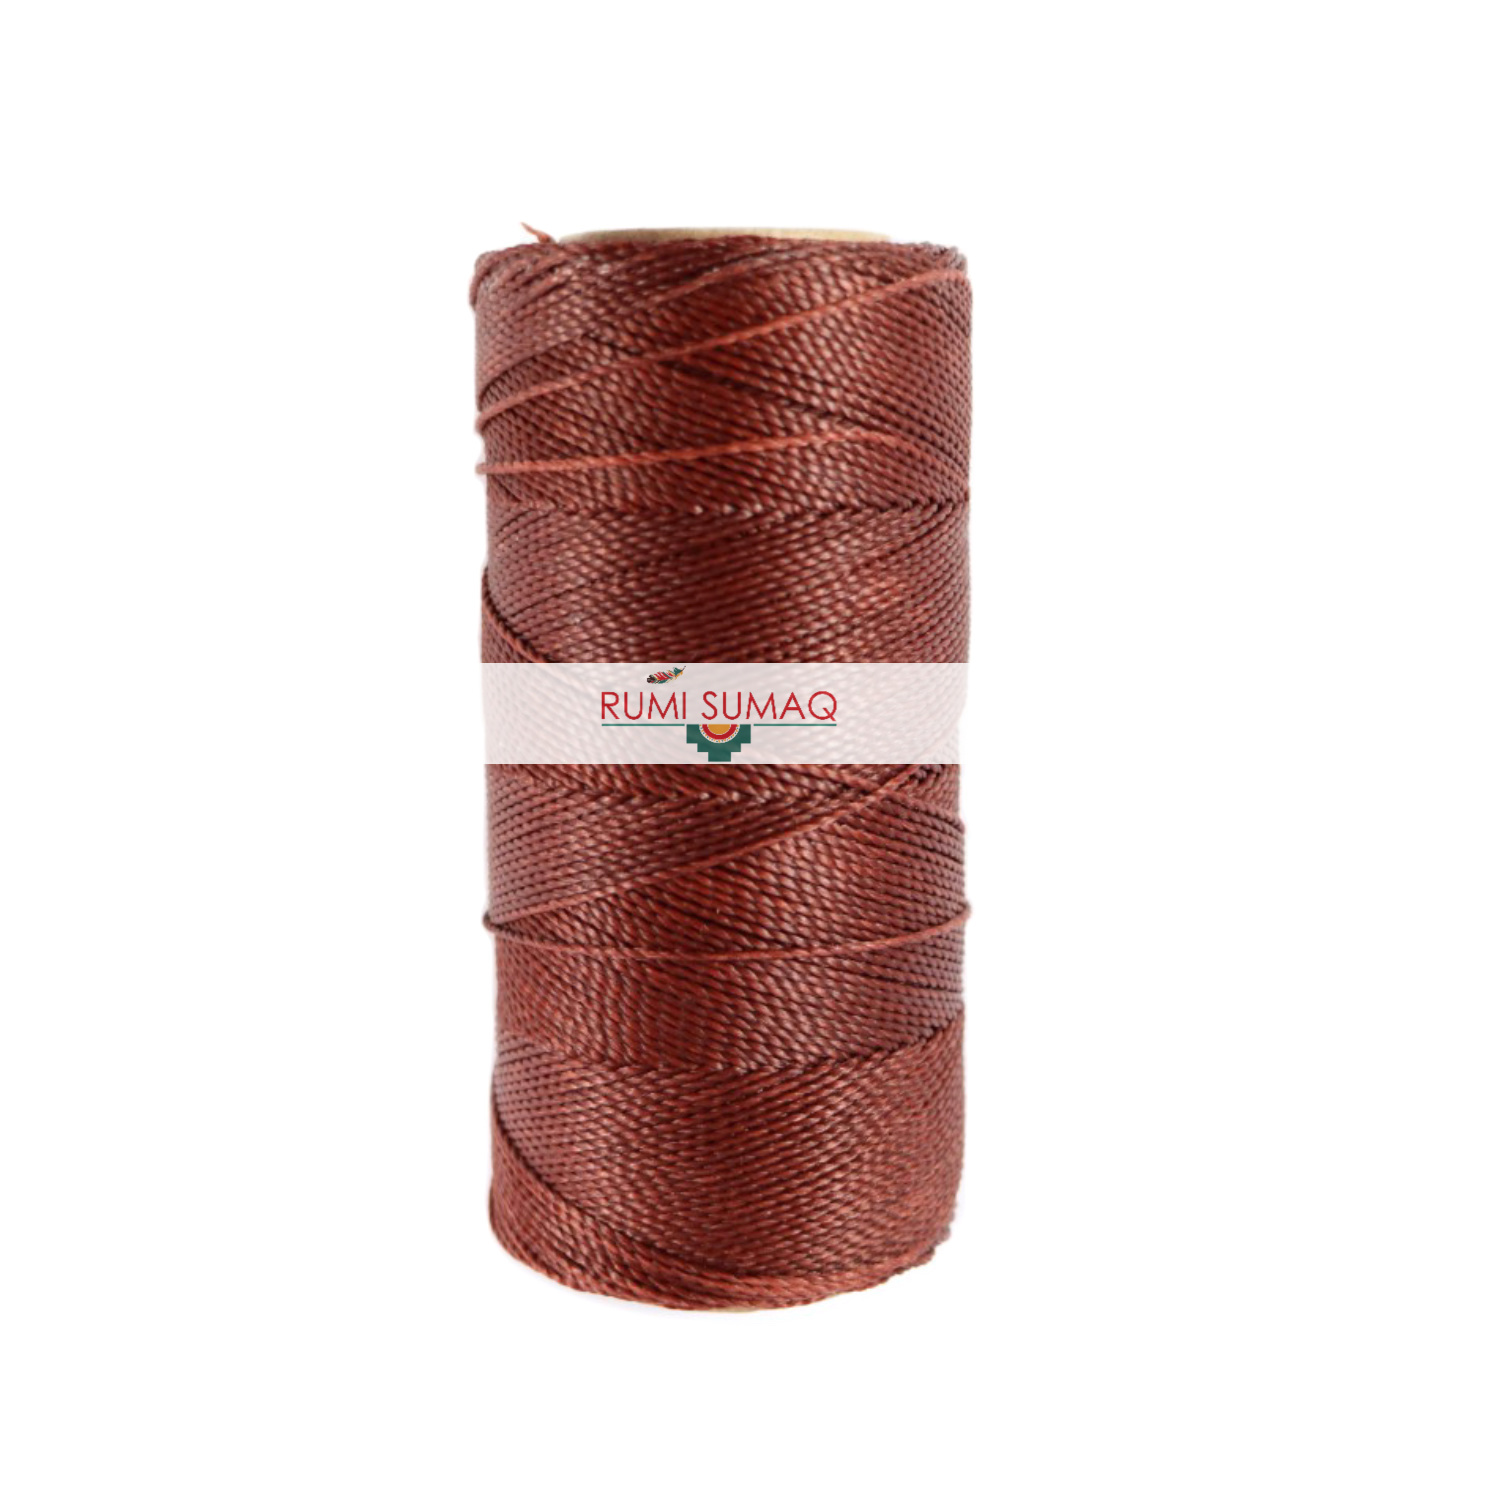 Linhasita 212 Copper 1mm Waxed Polyester Cord | Rumi Sumaq Waxed Macrame Cord for Beading, Jewelry Making, Basketry, Leather Working, Hand Stitching, Quilting and Macrame Knotting